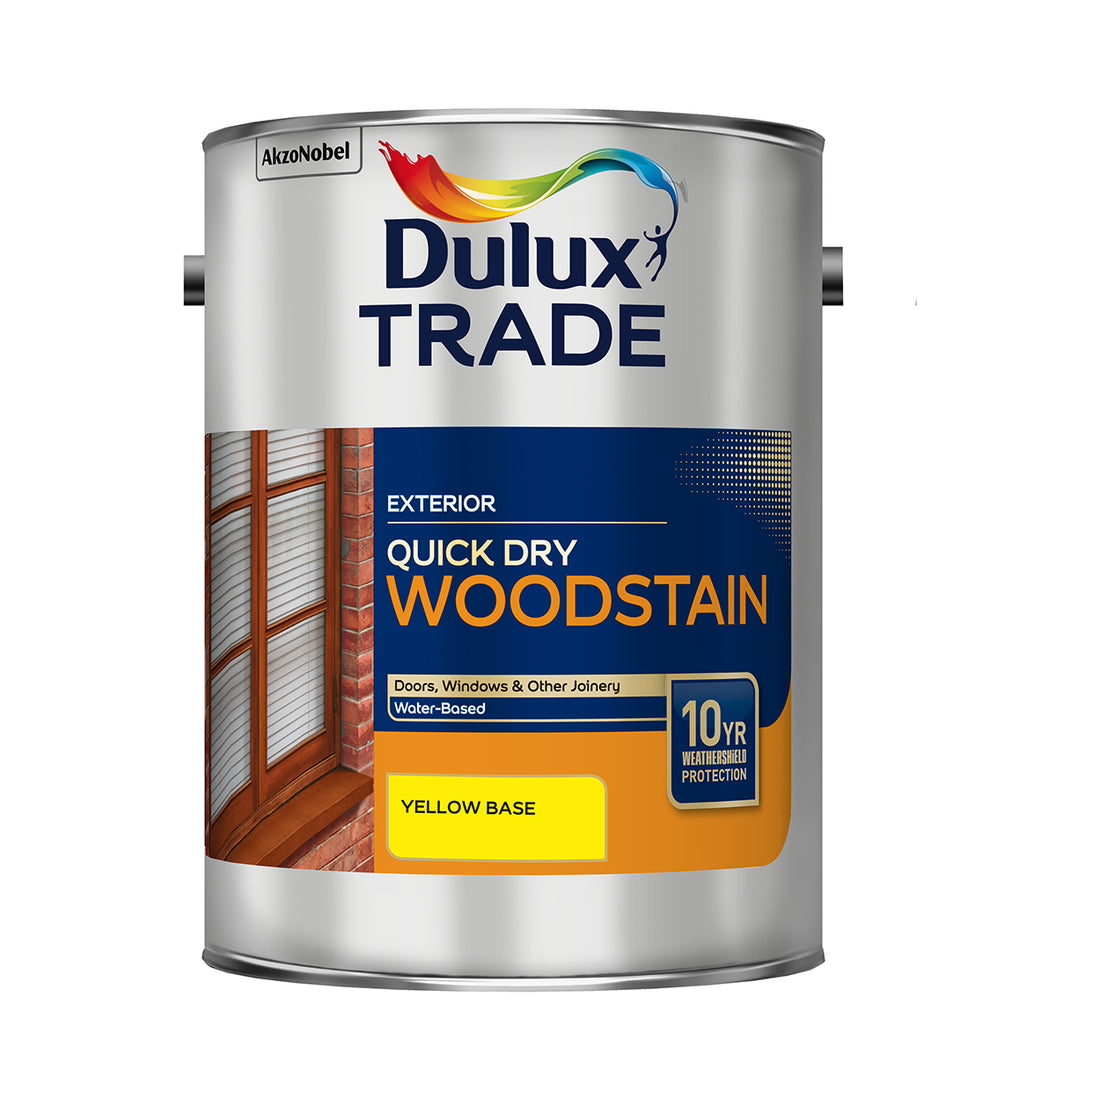 Dulux Trade Quick Dry Woodstain Yellow Base 5L